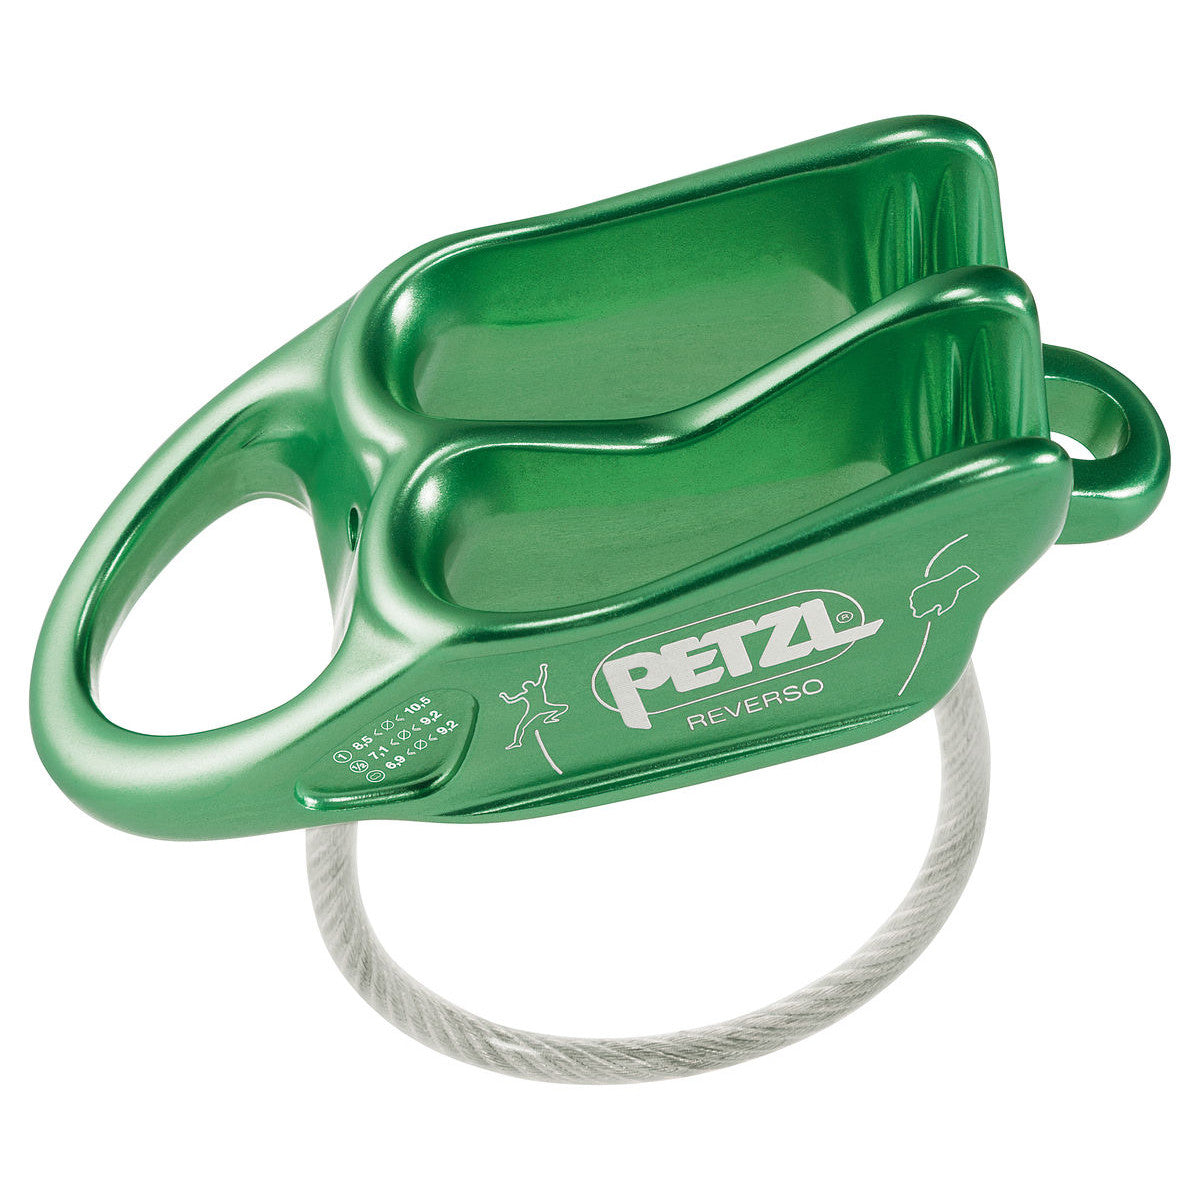 Petzl Reverso belay device, side view shown in green colour 